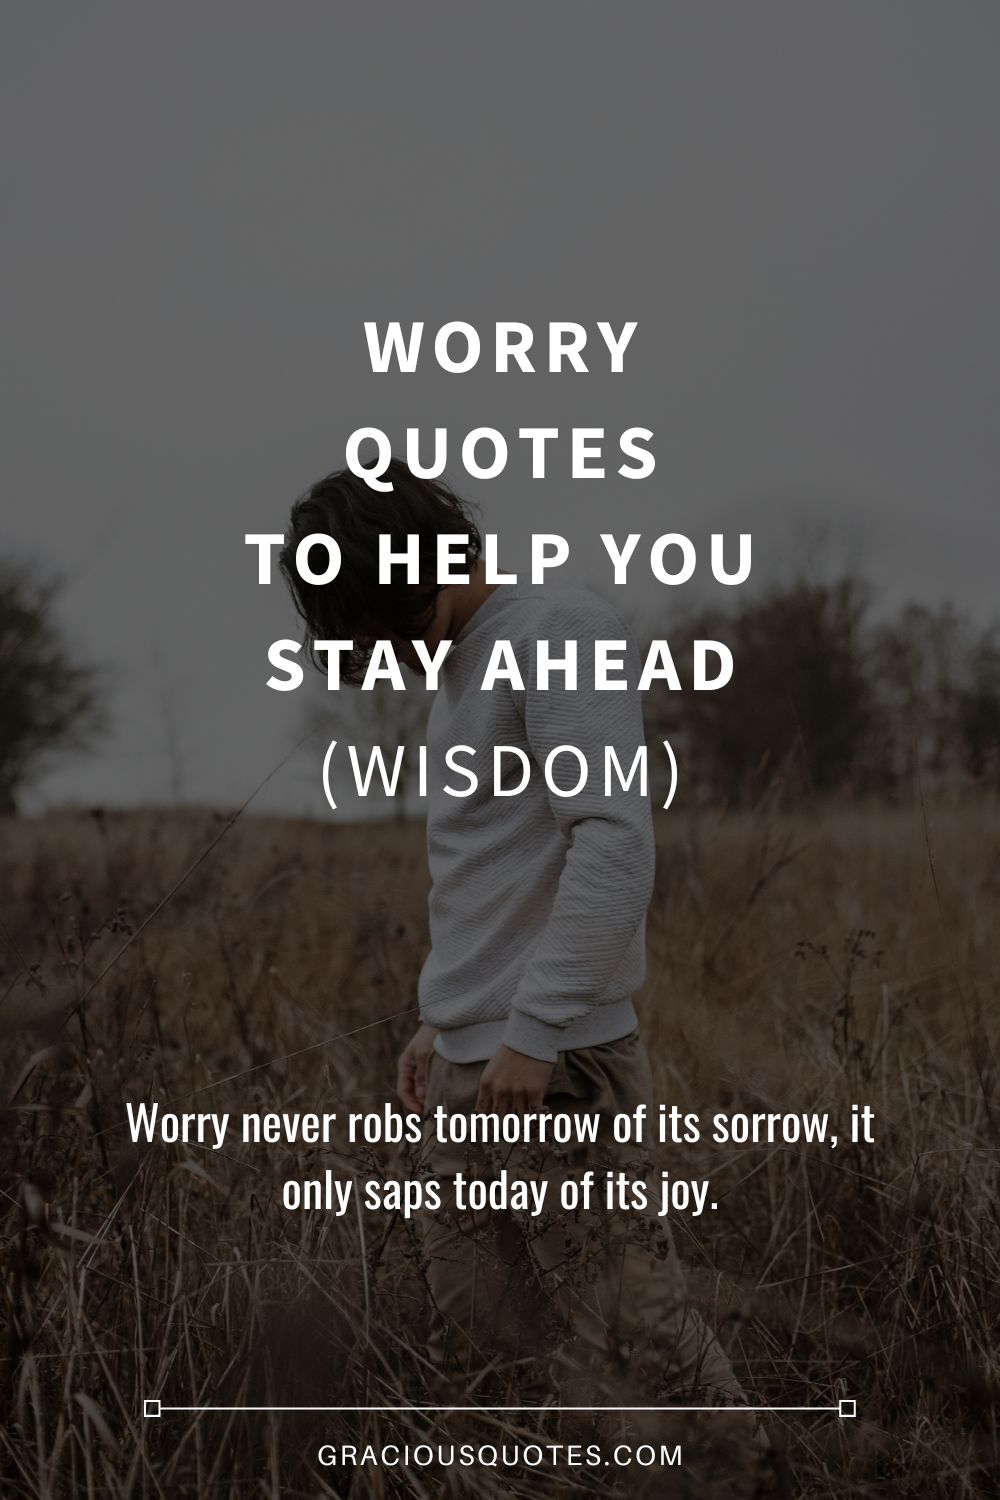 Worry Quotes to Help You Stay Ahead (WISDOM) - Gracious Quotes